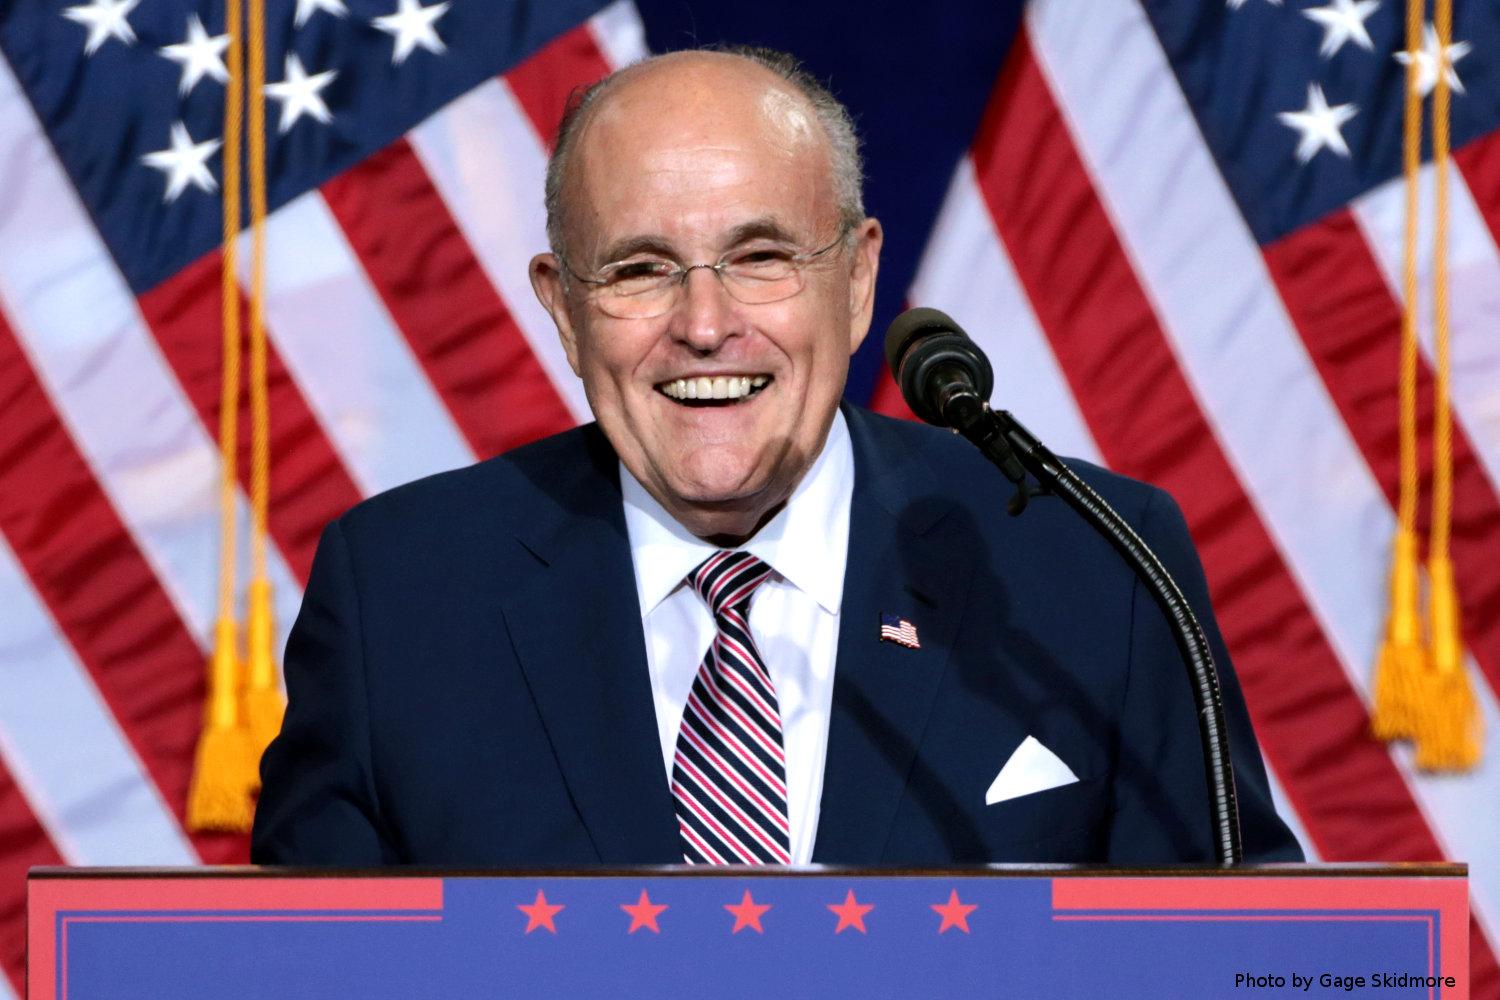 Ukraine's fantasy conspiracy theories were largely pushed by Rudy Giuliani 1